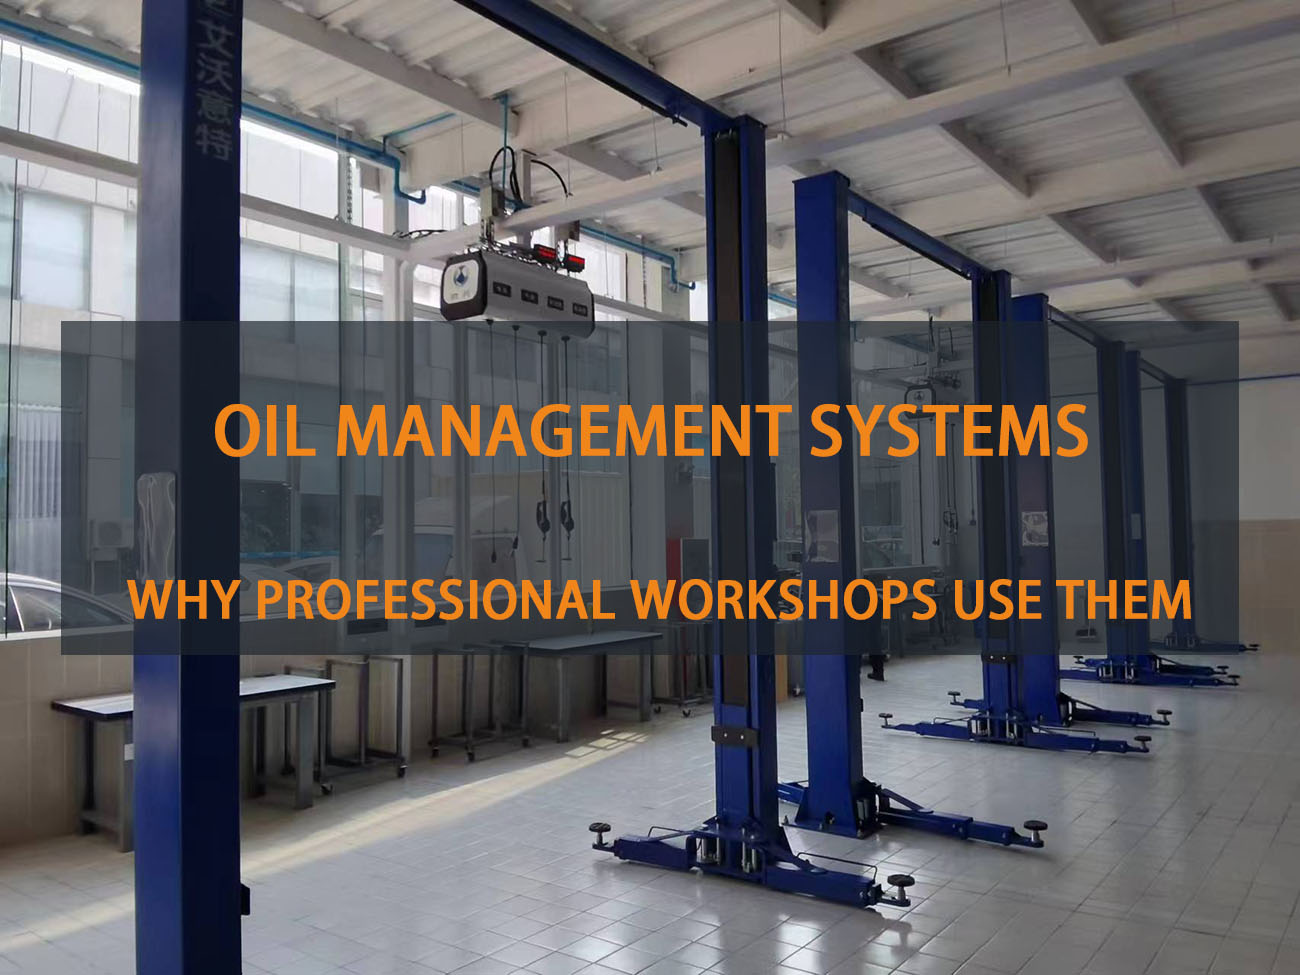 Oil Management Systems – Why Professional Workshops Use Them